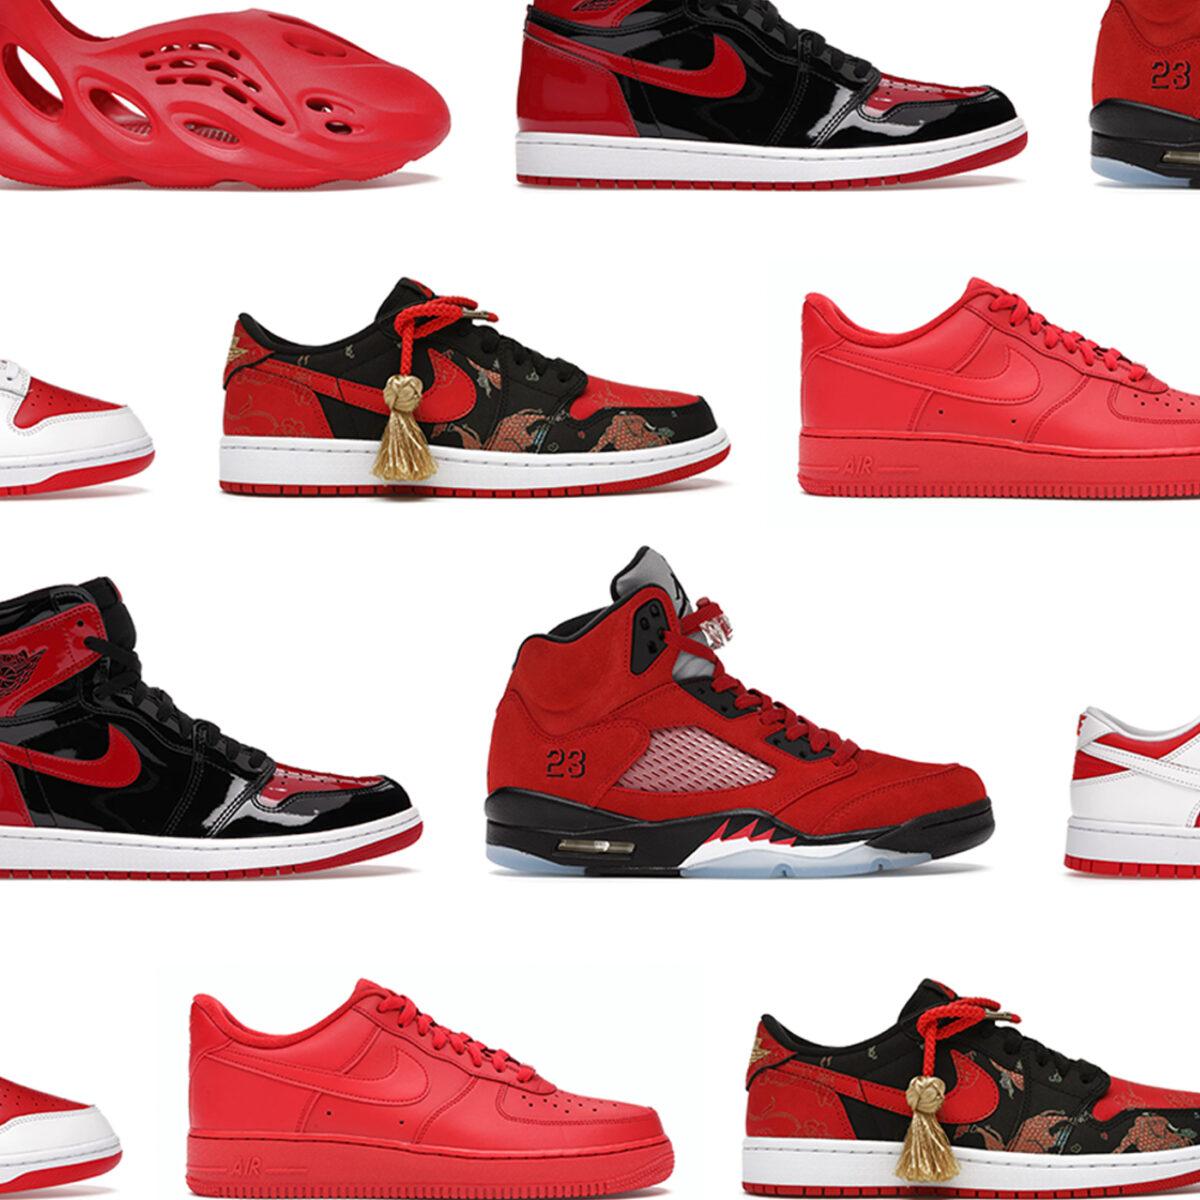 The 10 Best Valentine's Day Shoes | Swag shoes, Shoes, Red sneakers